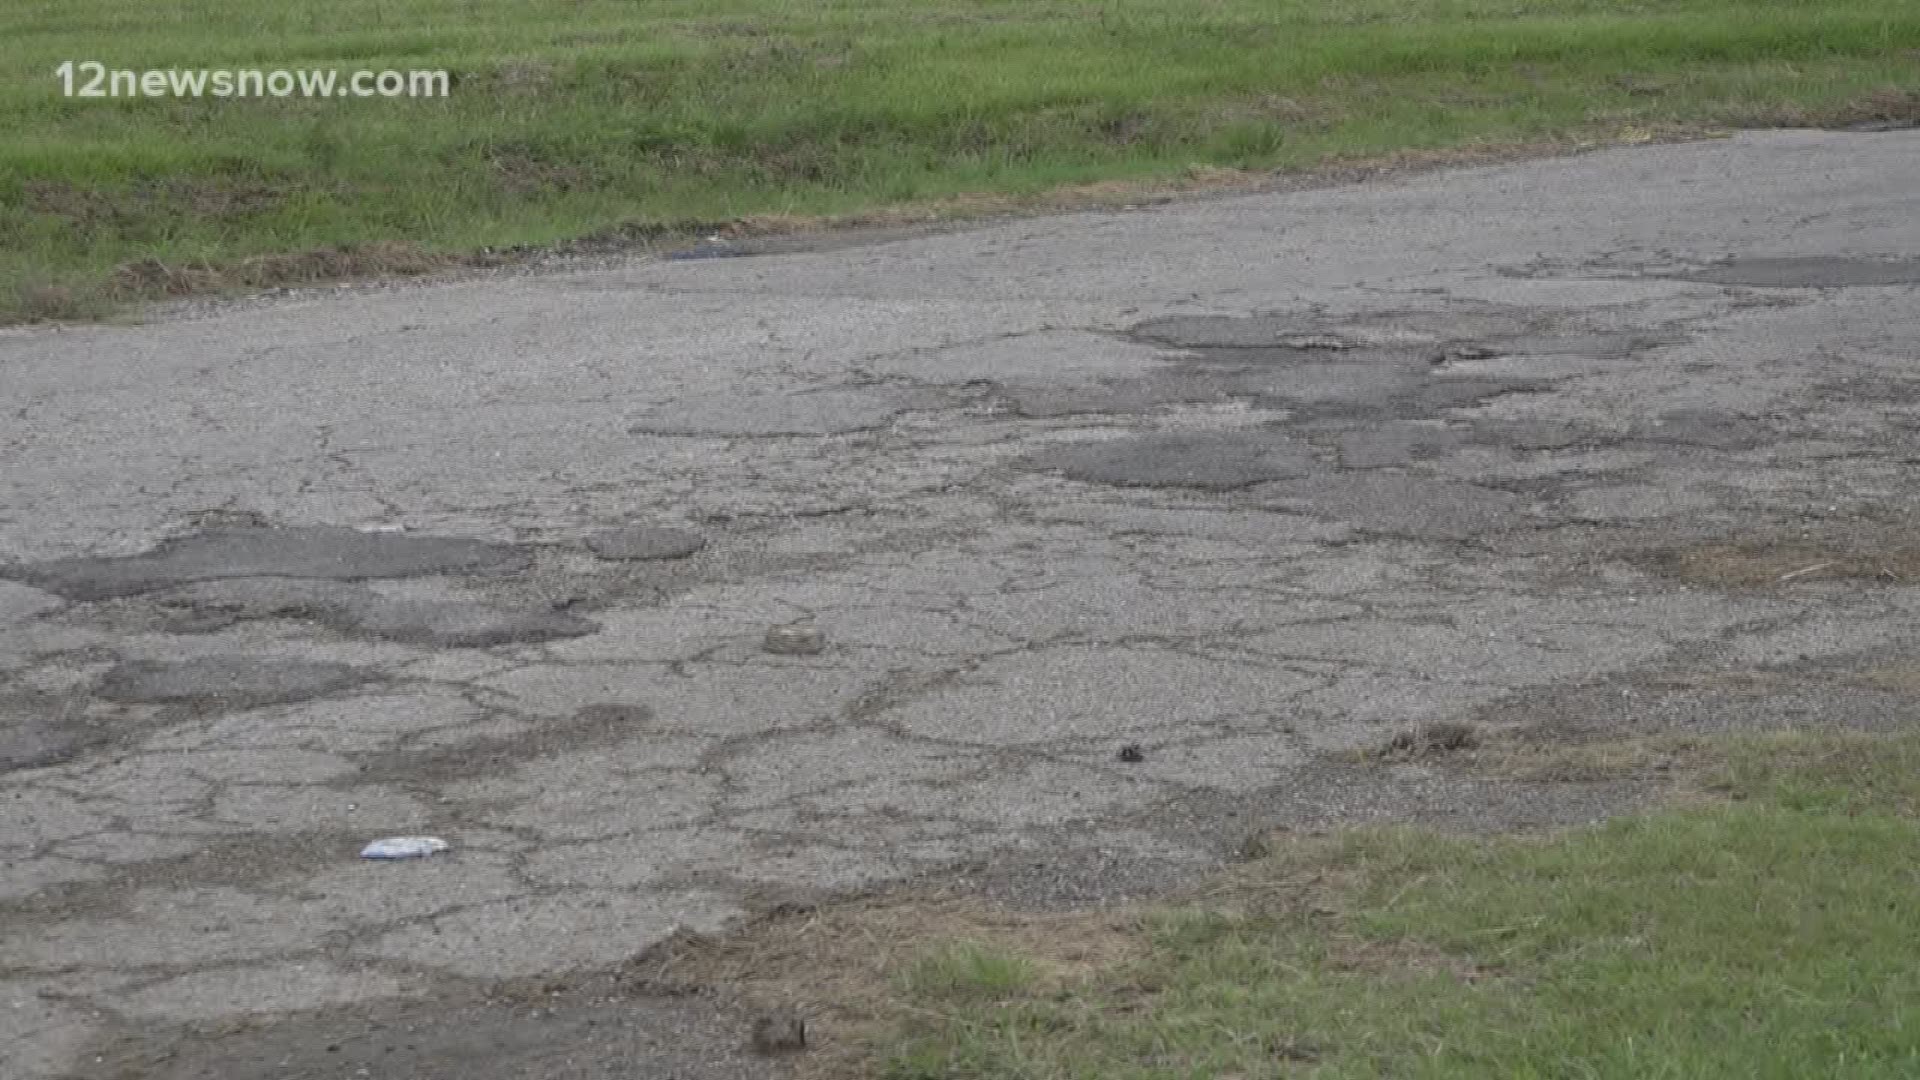 The Groves city manager said homeowner participation is essential to get approval for the funds to repair the roads in their neighborhood.